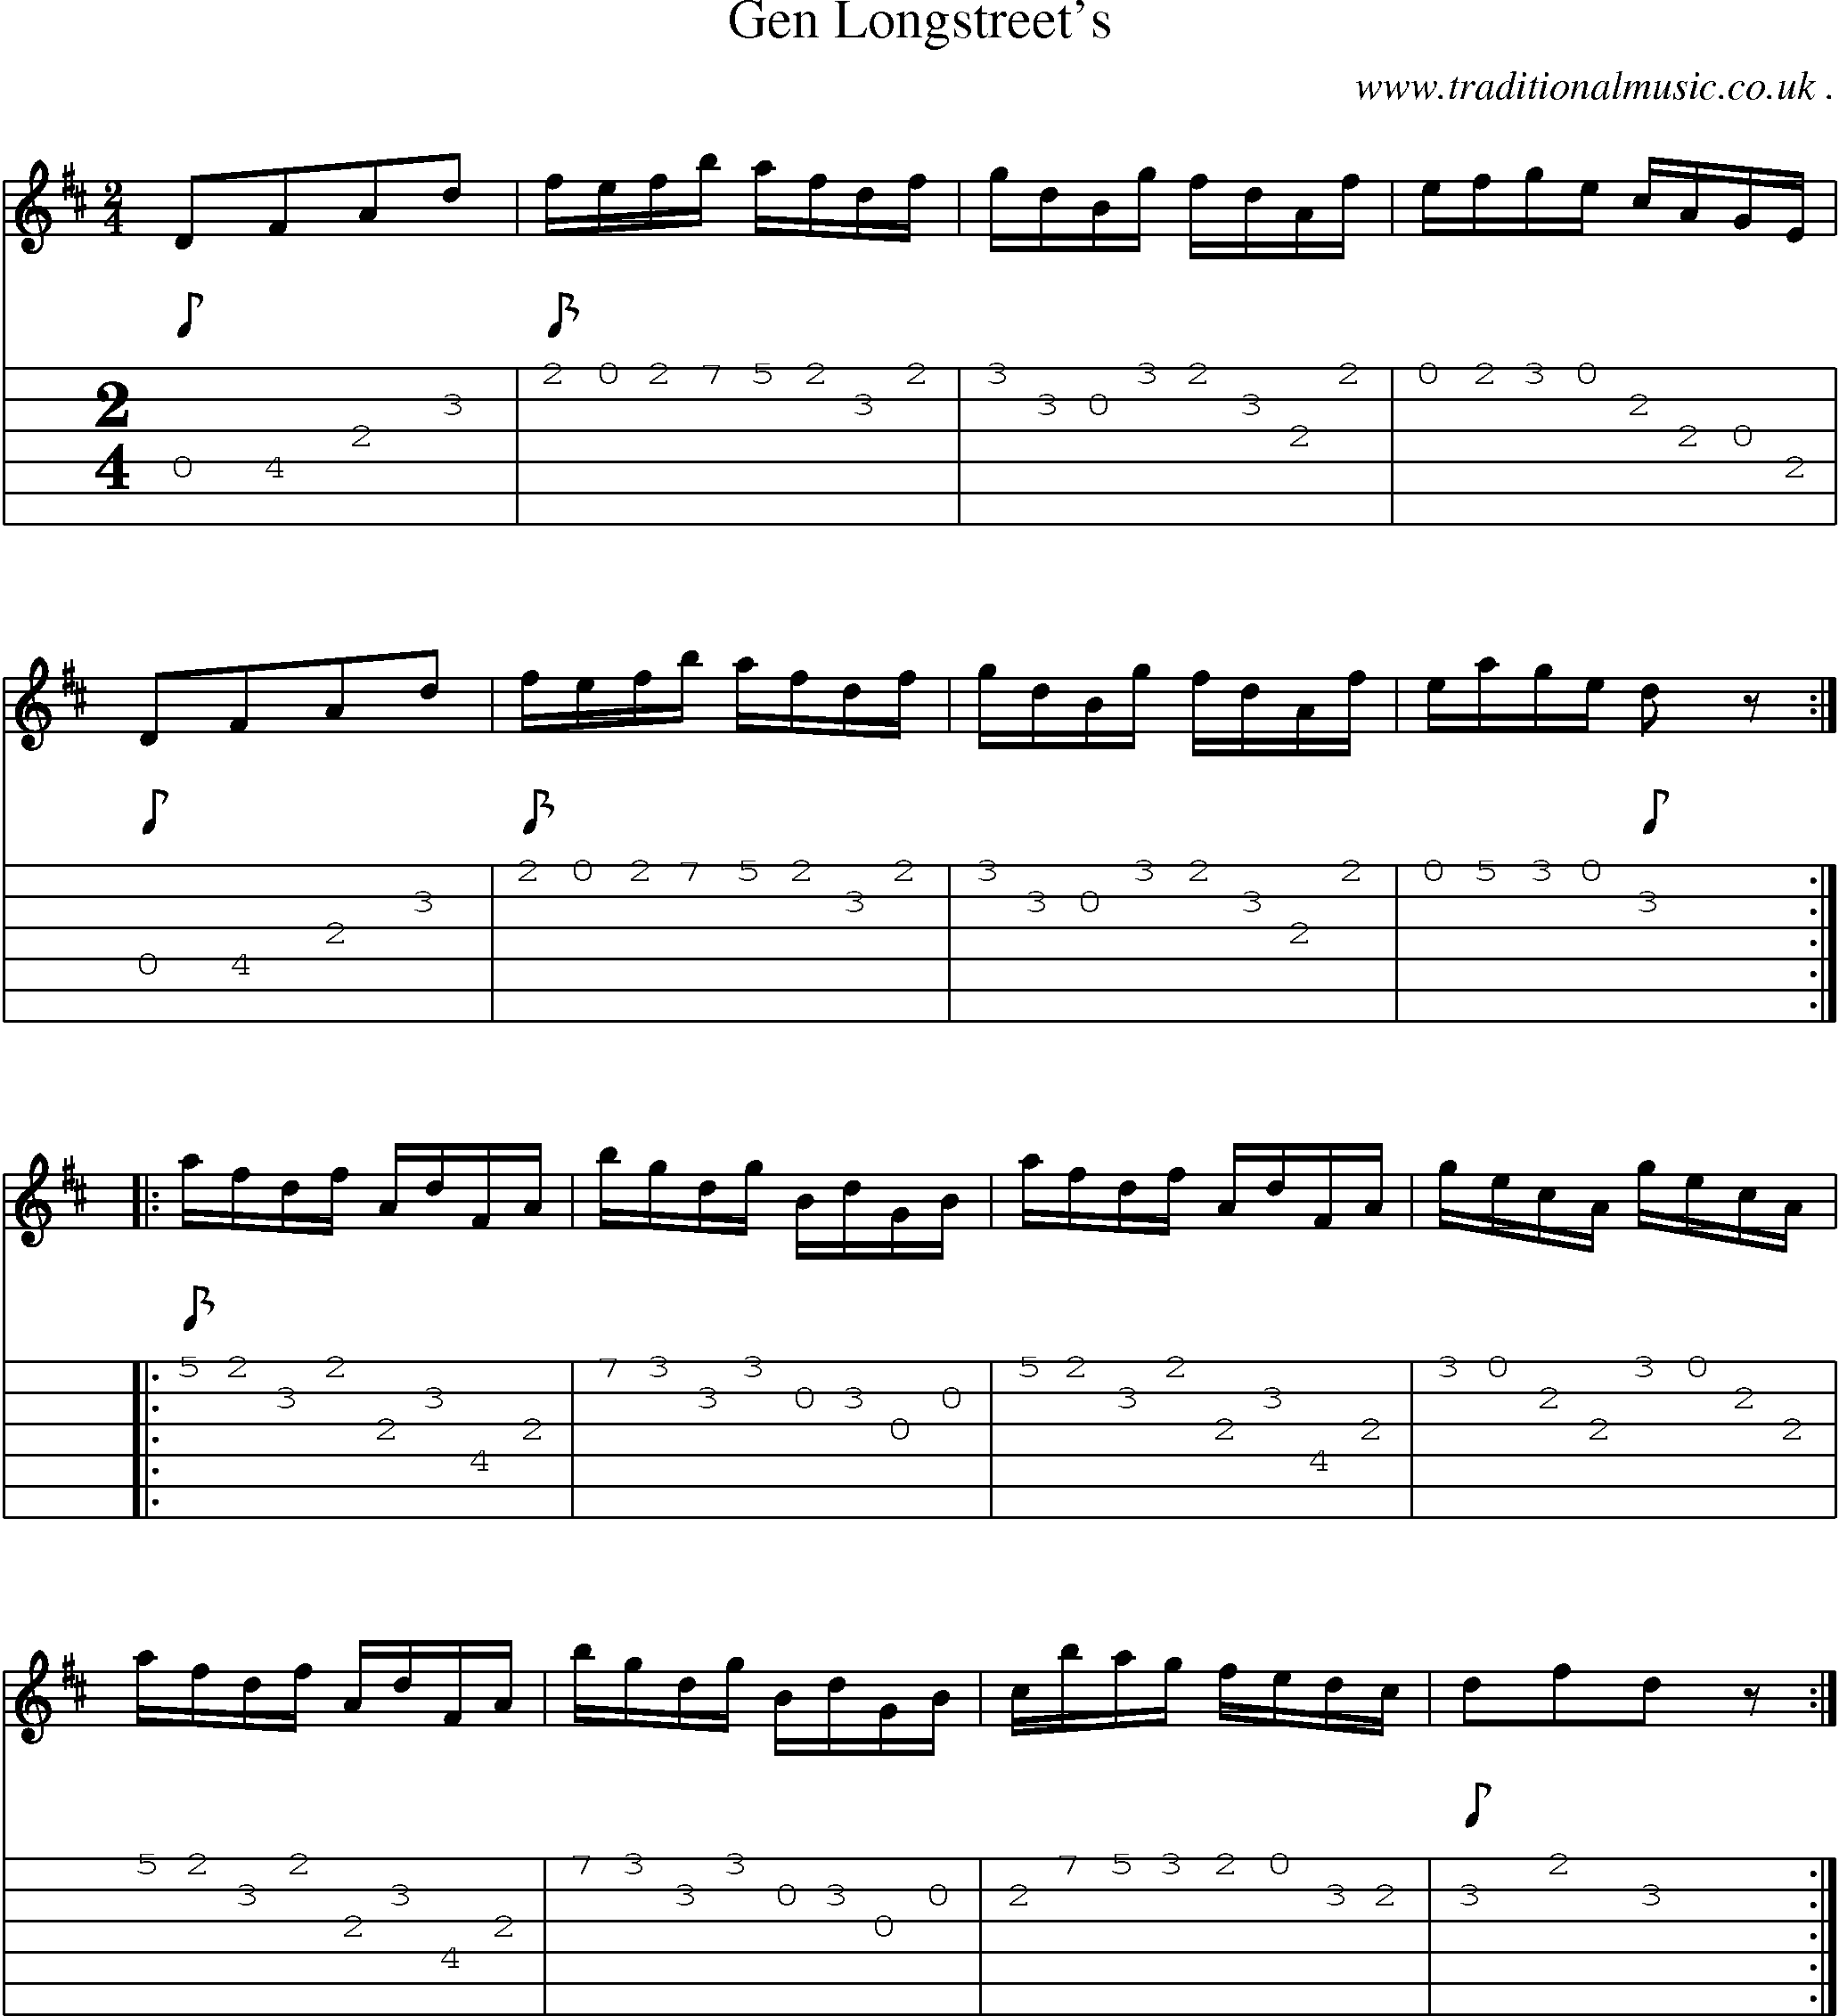 Sheet-Music and Guitar Tabs for Gen Longstreets